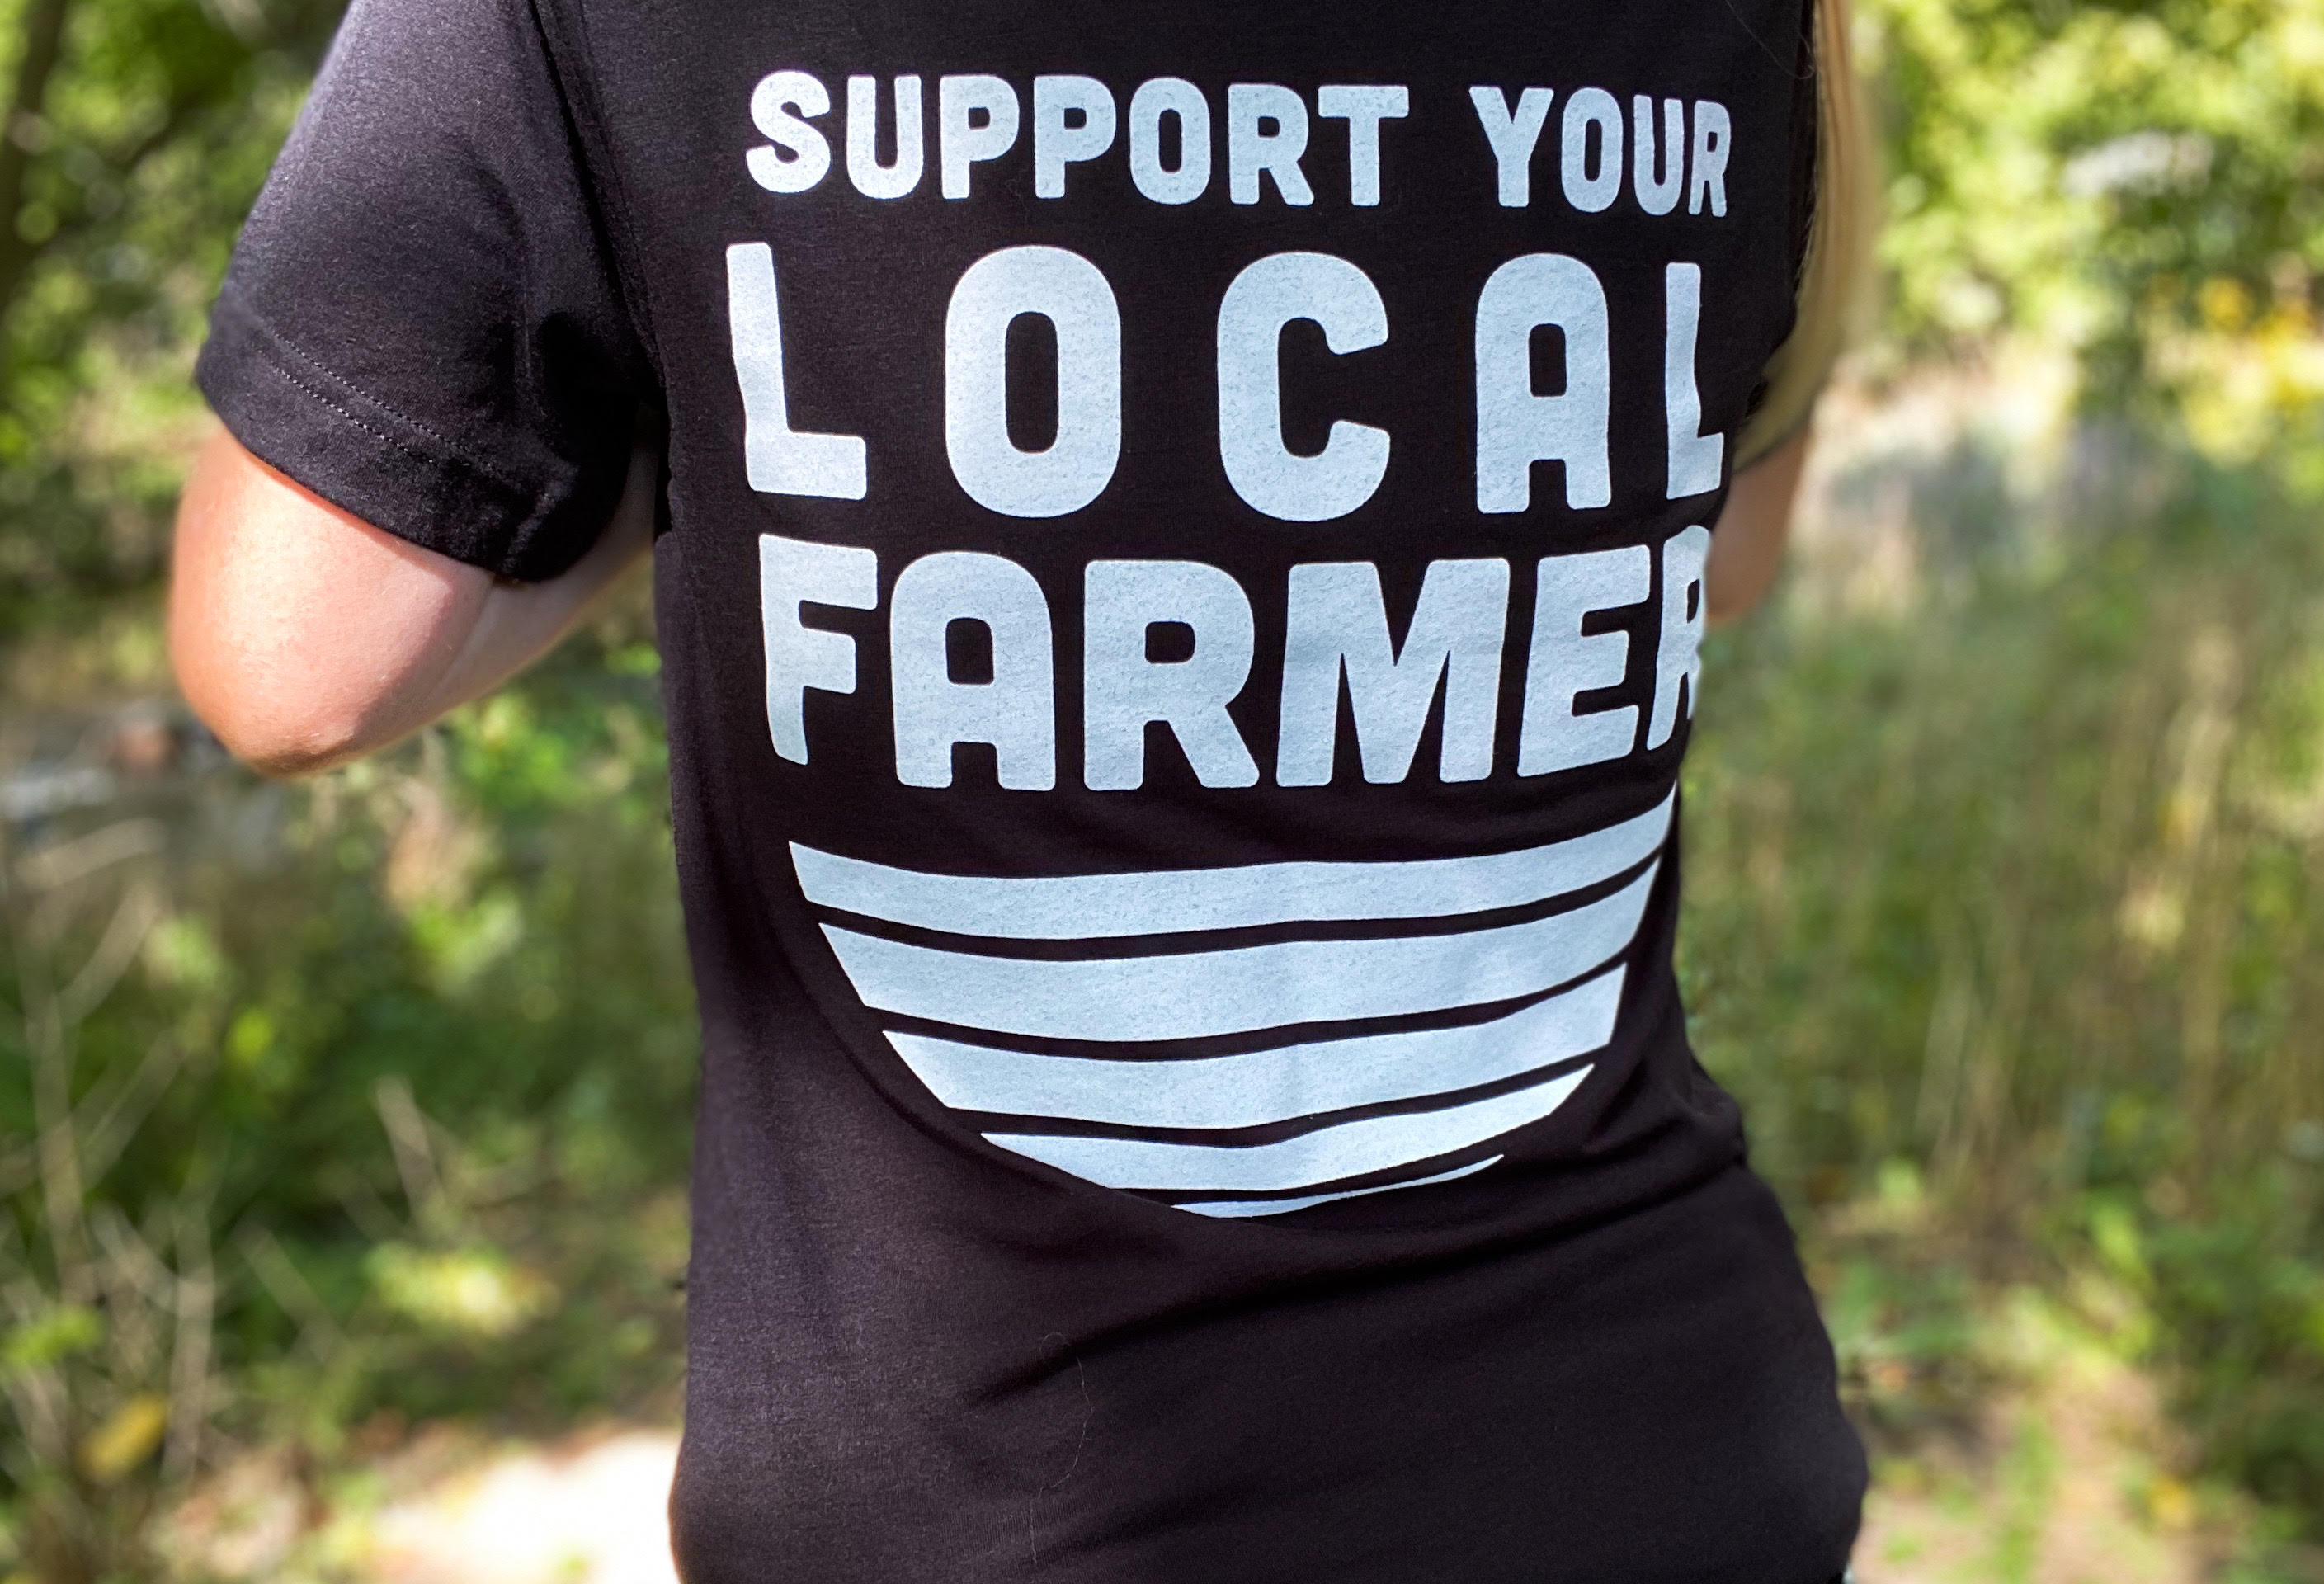 Support Your Local Farmer t-shirt